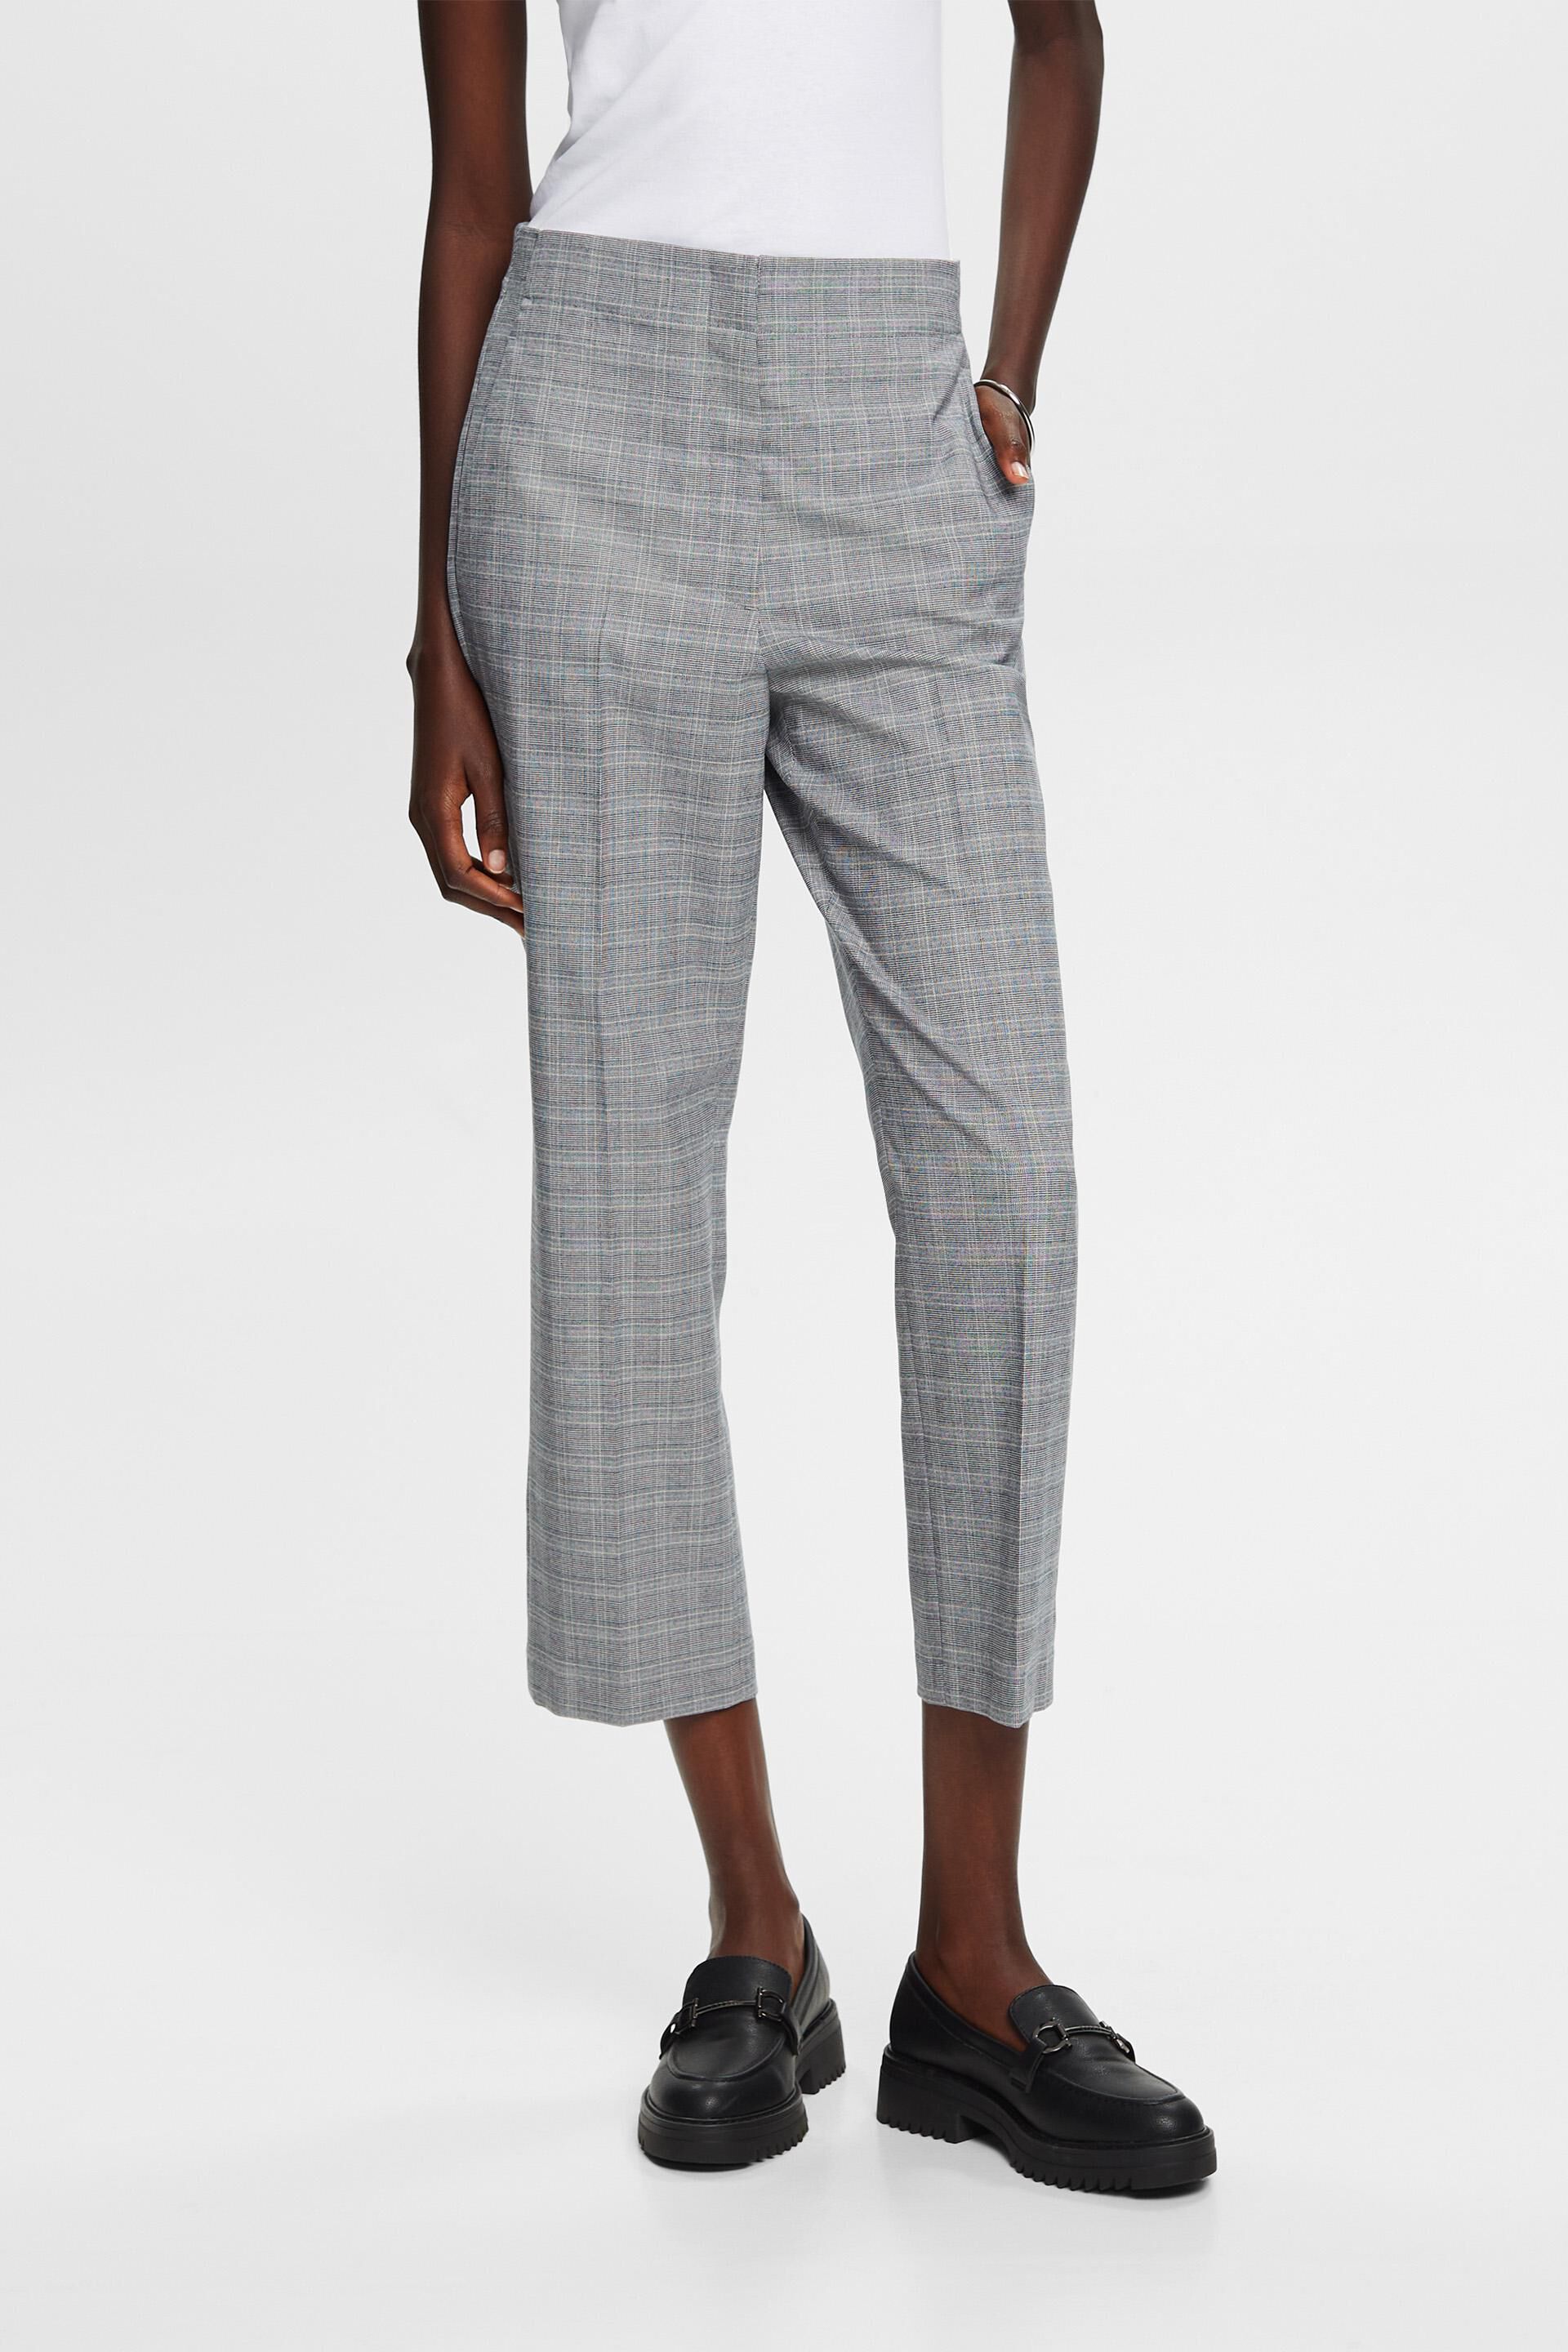 Esprit trousers Match: checked Mix kick-flare &